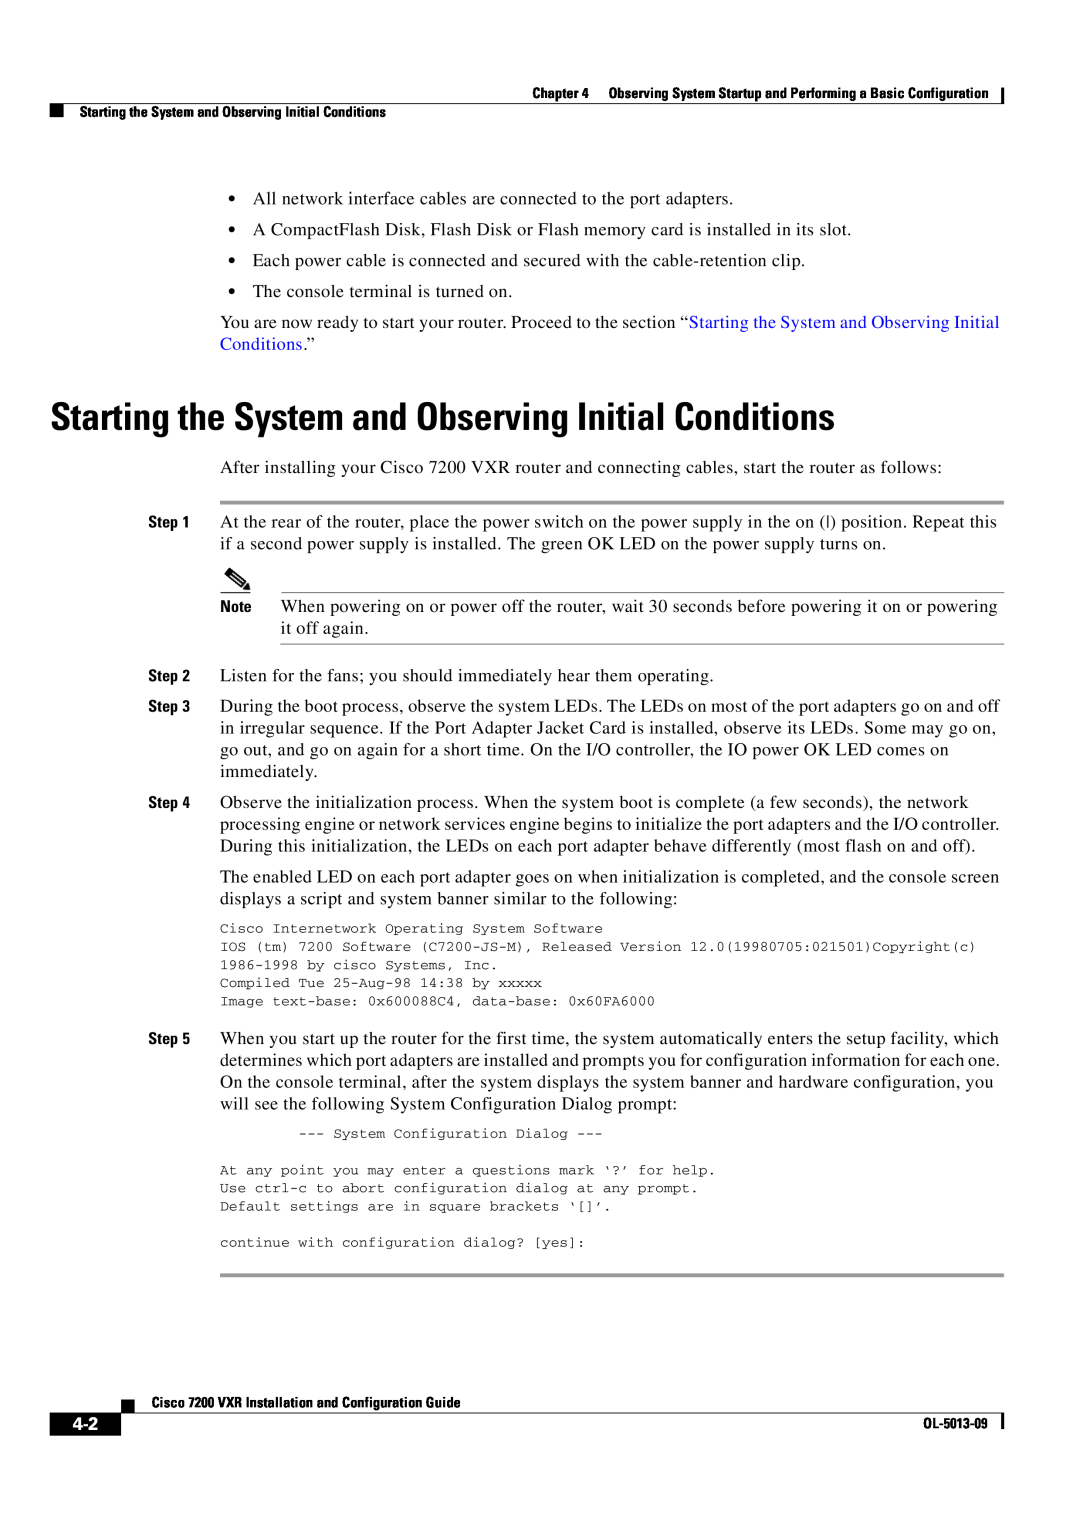 Cisco Systems 7200 VXR manual Starting the System and Observing Initial Conditions 